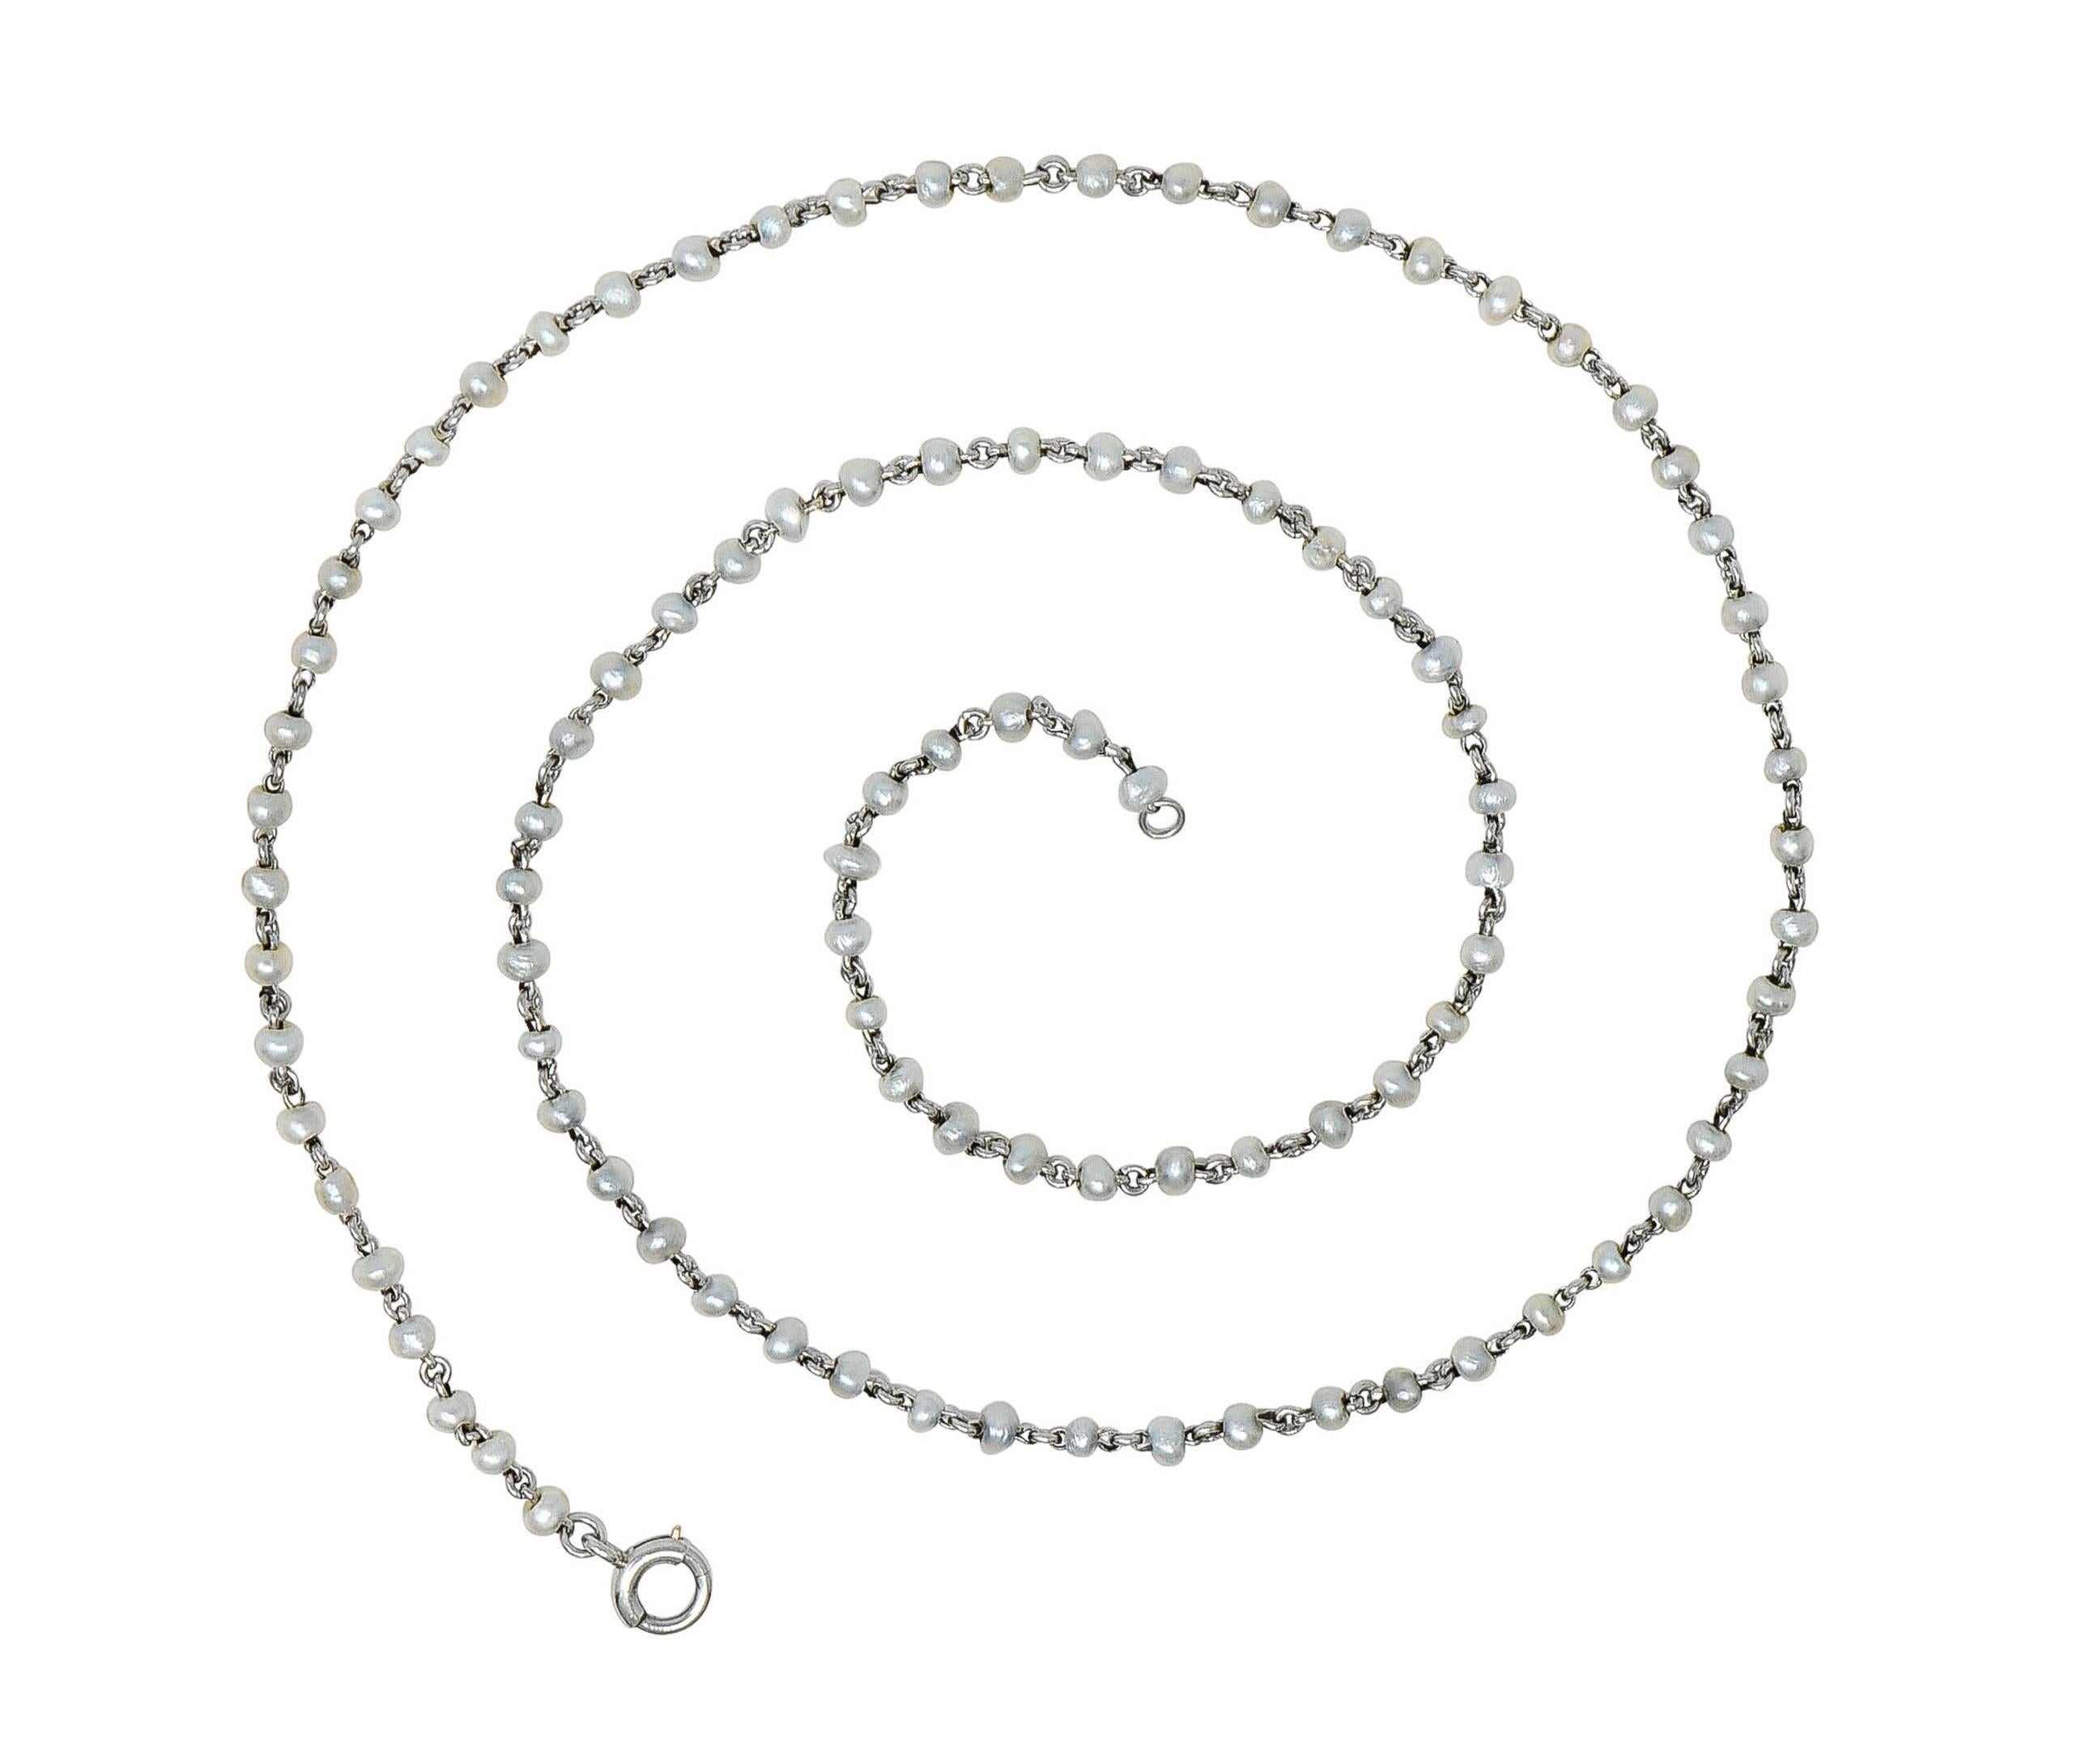 Comprised of platinum links with 2.0 to 2.5 mm near-round seed pearl beads
Cream to gray in body color with strong iridescence 
Connected via jump ring links 
Completed by spring clasp closure 
Tested as platinum
Circa: 1910
Width at widest: 1/8